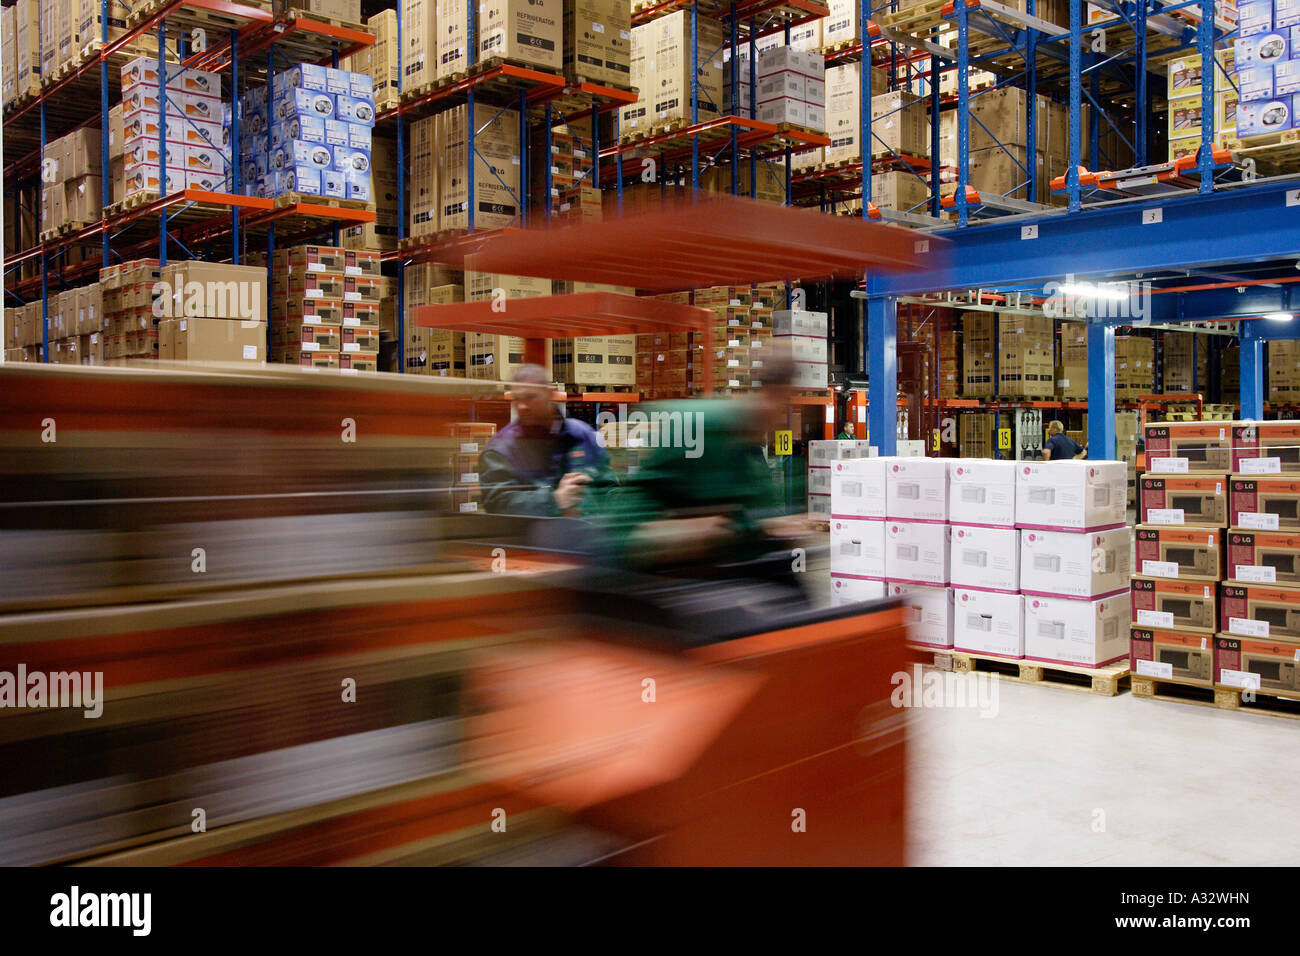 Warehousemen operating forklifts in a high rack warehouse, Willich, Germany Stock Photo